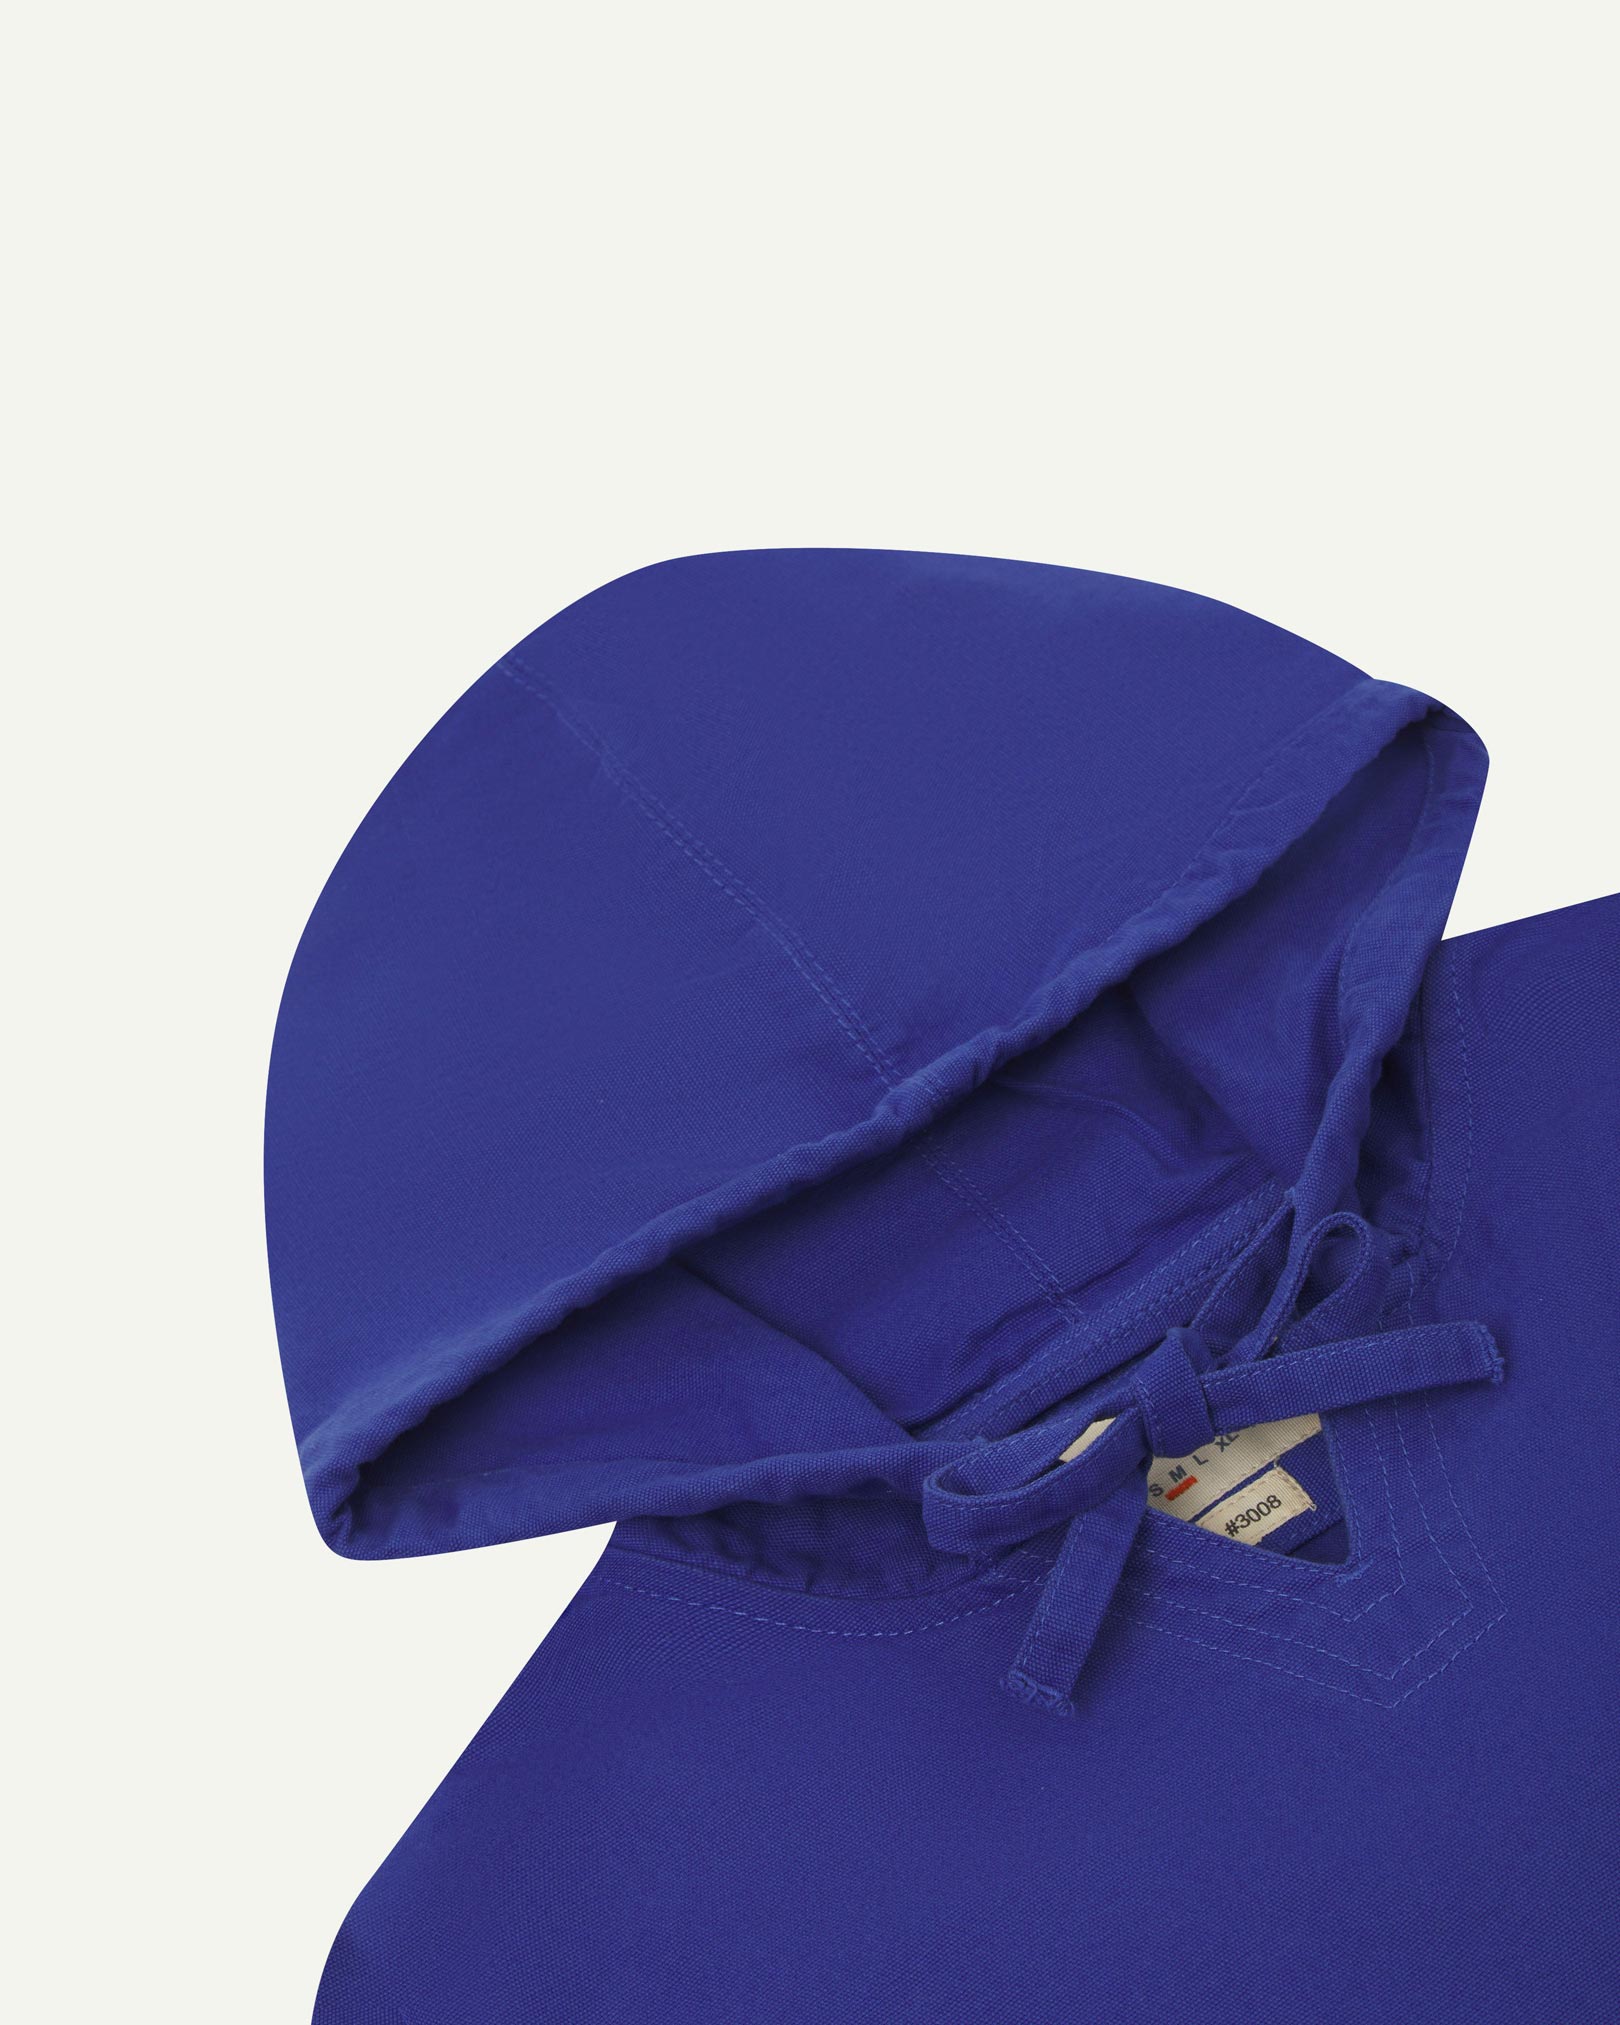 Closer look at the hood of the Uskees organic cotton smock in ultra blue showing hood, hood drawstring and quadruply stitched neck area.